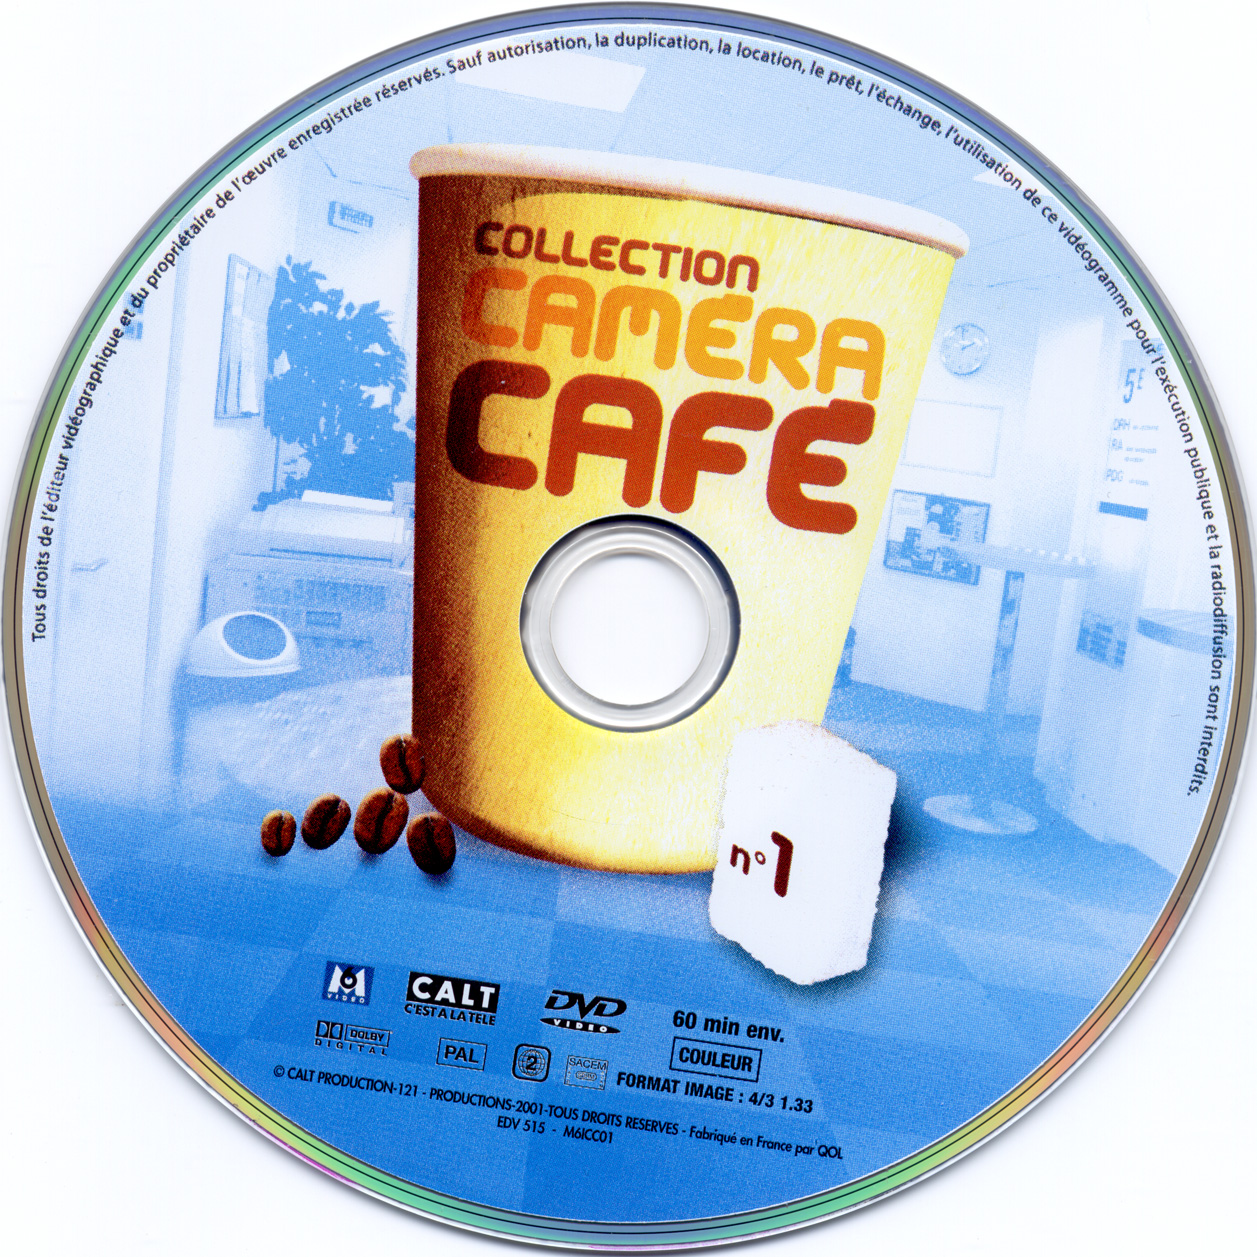 Collection Camra Caf vol 1